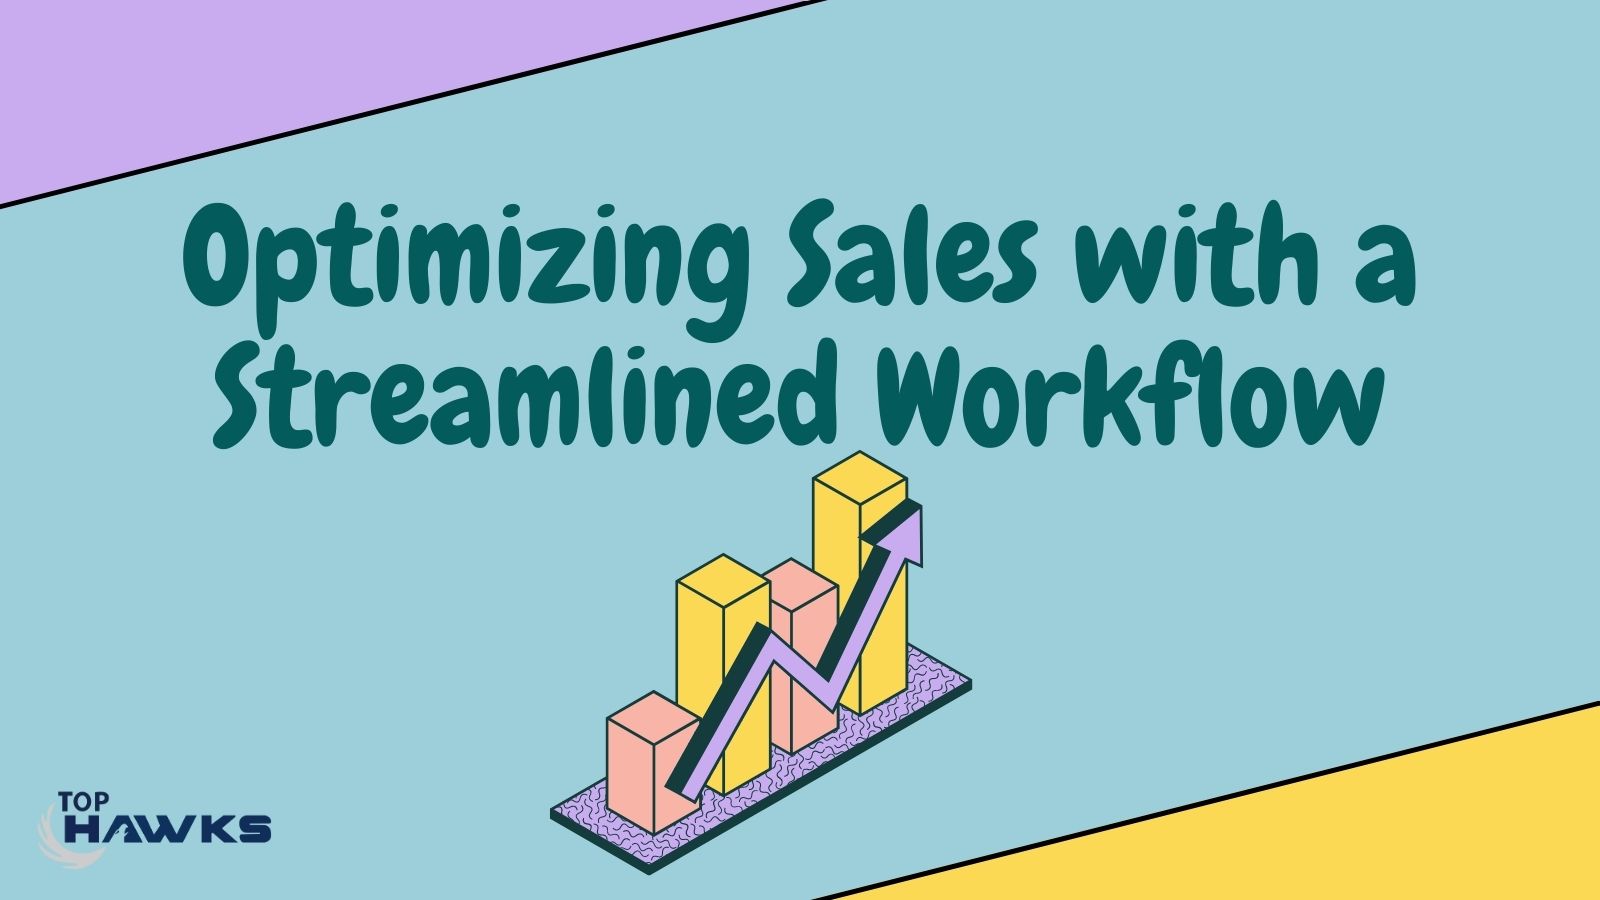 Image depicting Optimizing Sales with a Streamlined Workflow